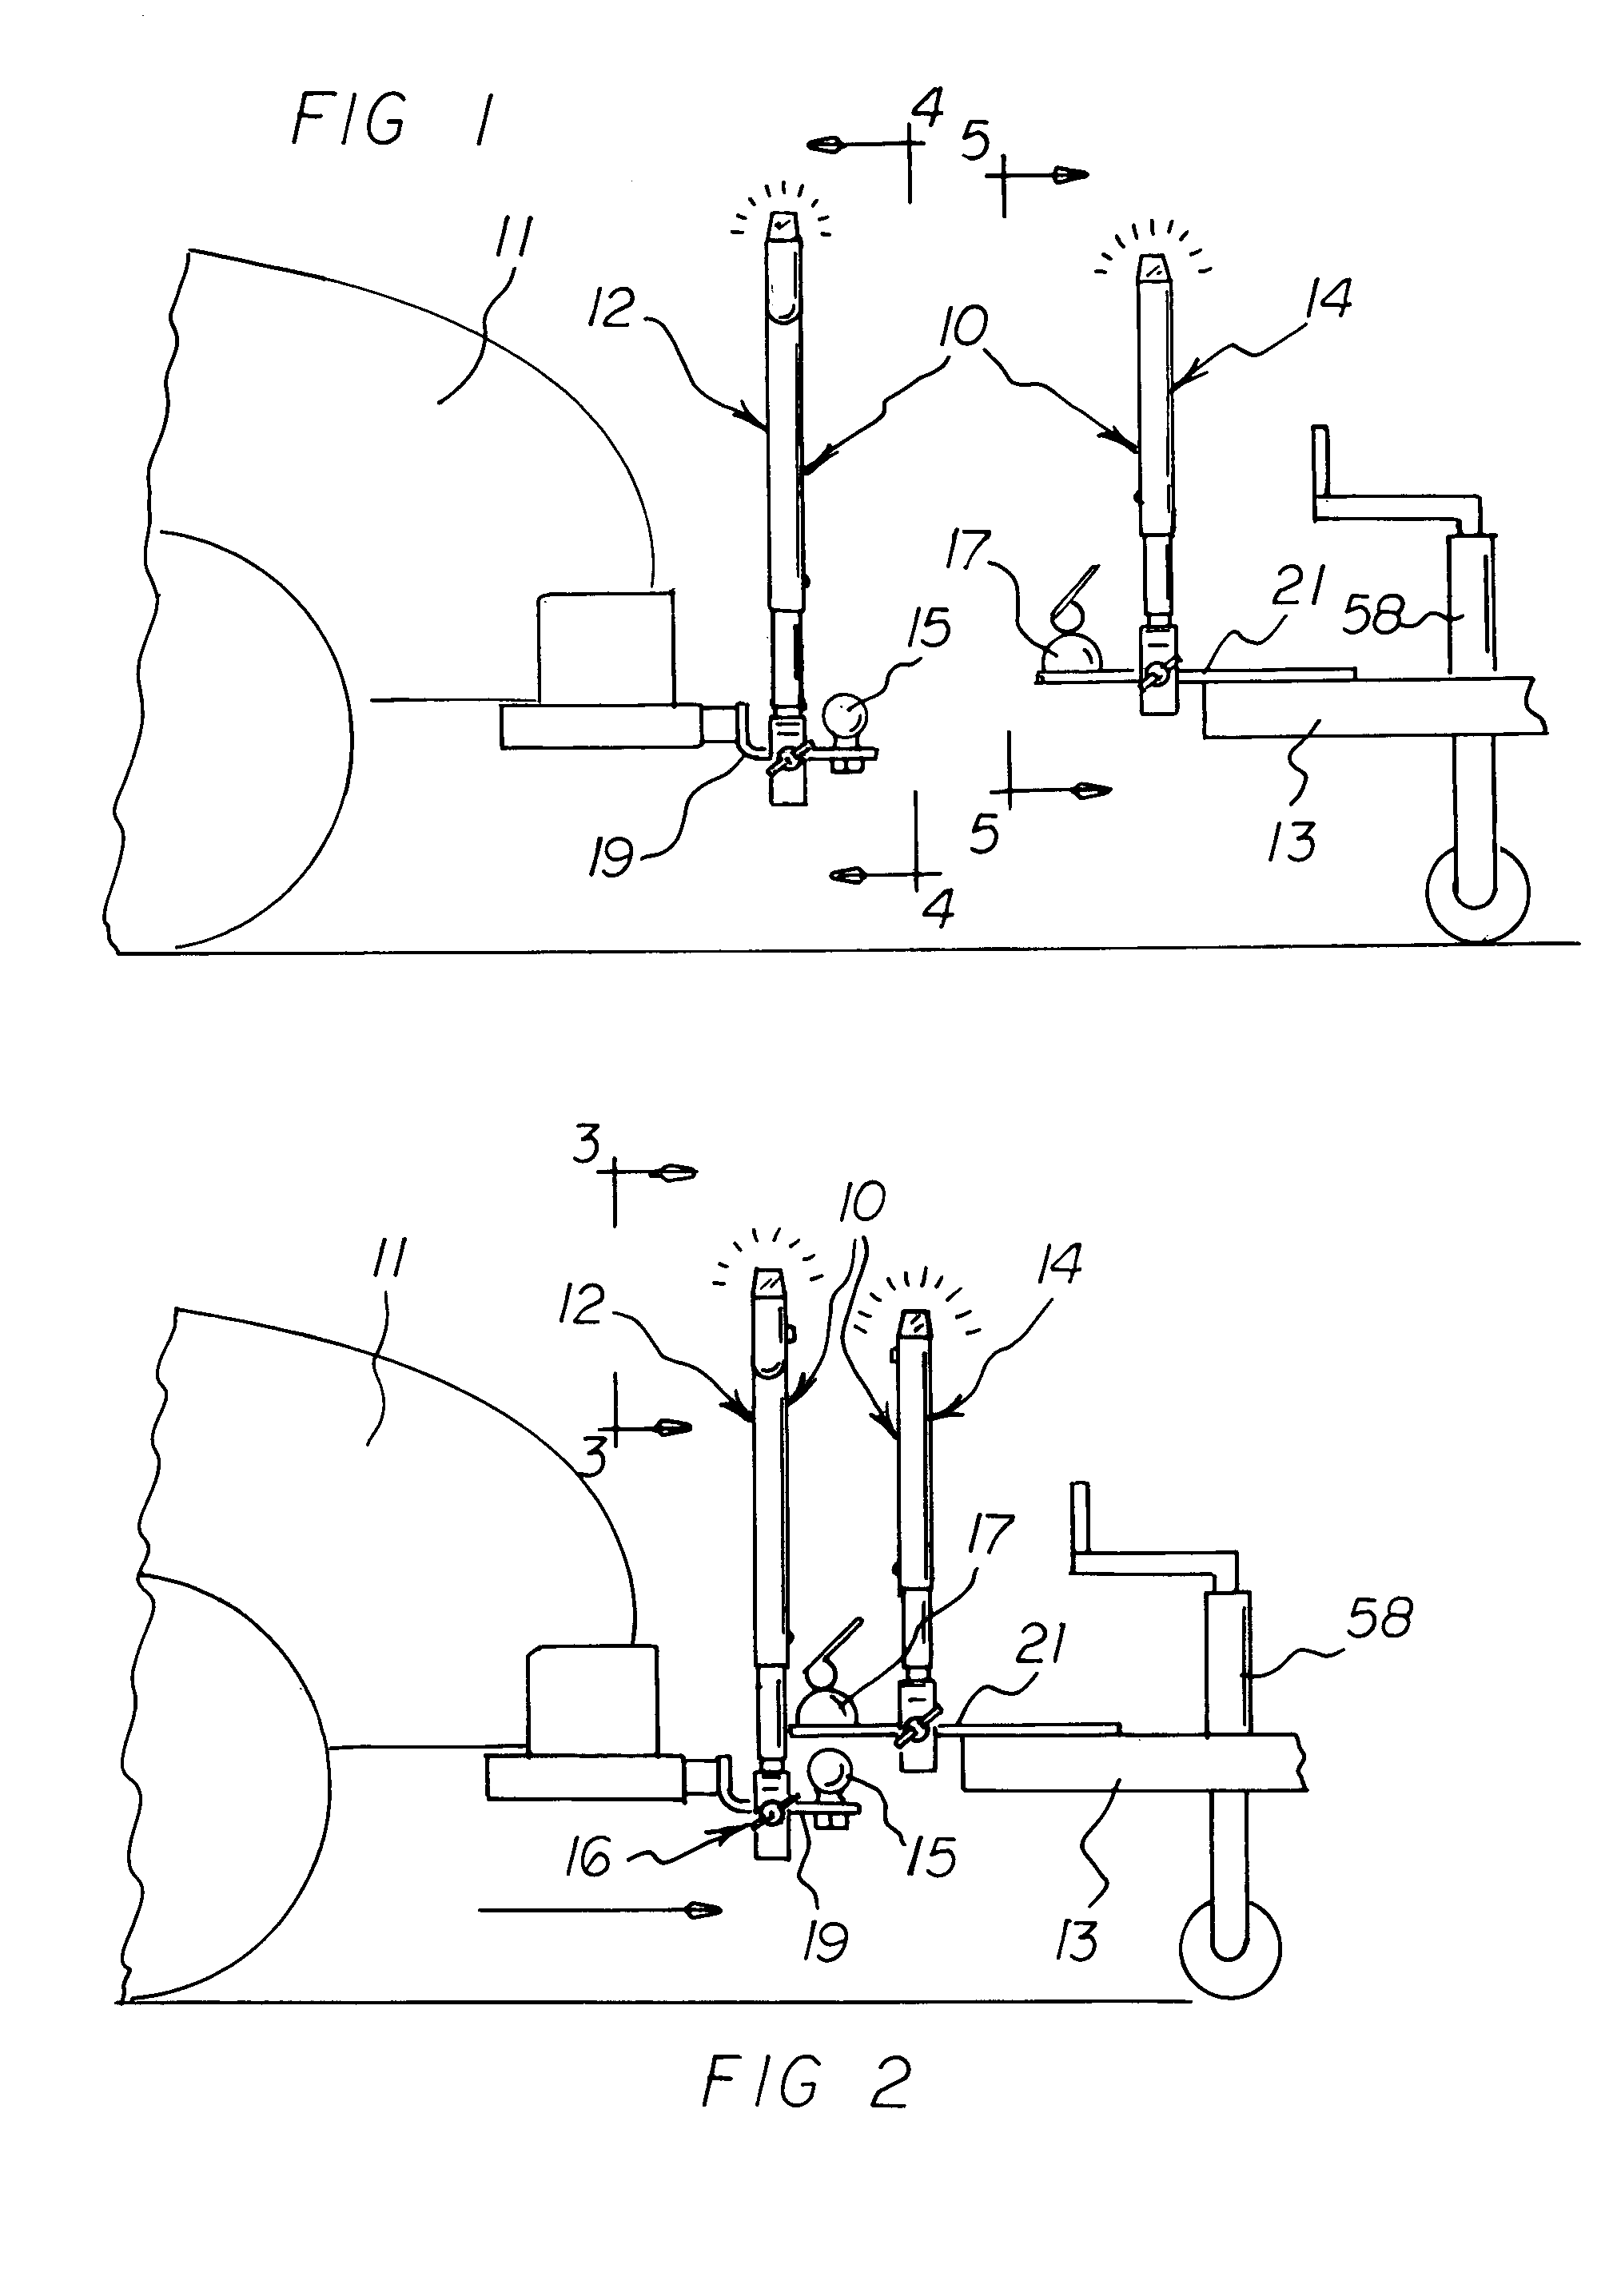 Vehicle and trailer mounted hitch alignment apparatus